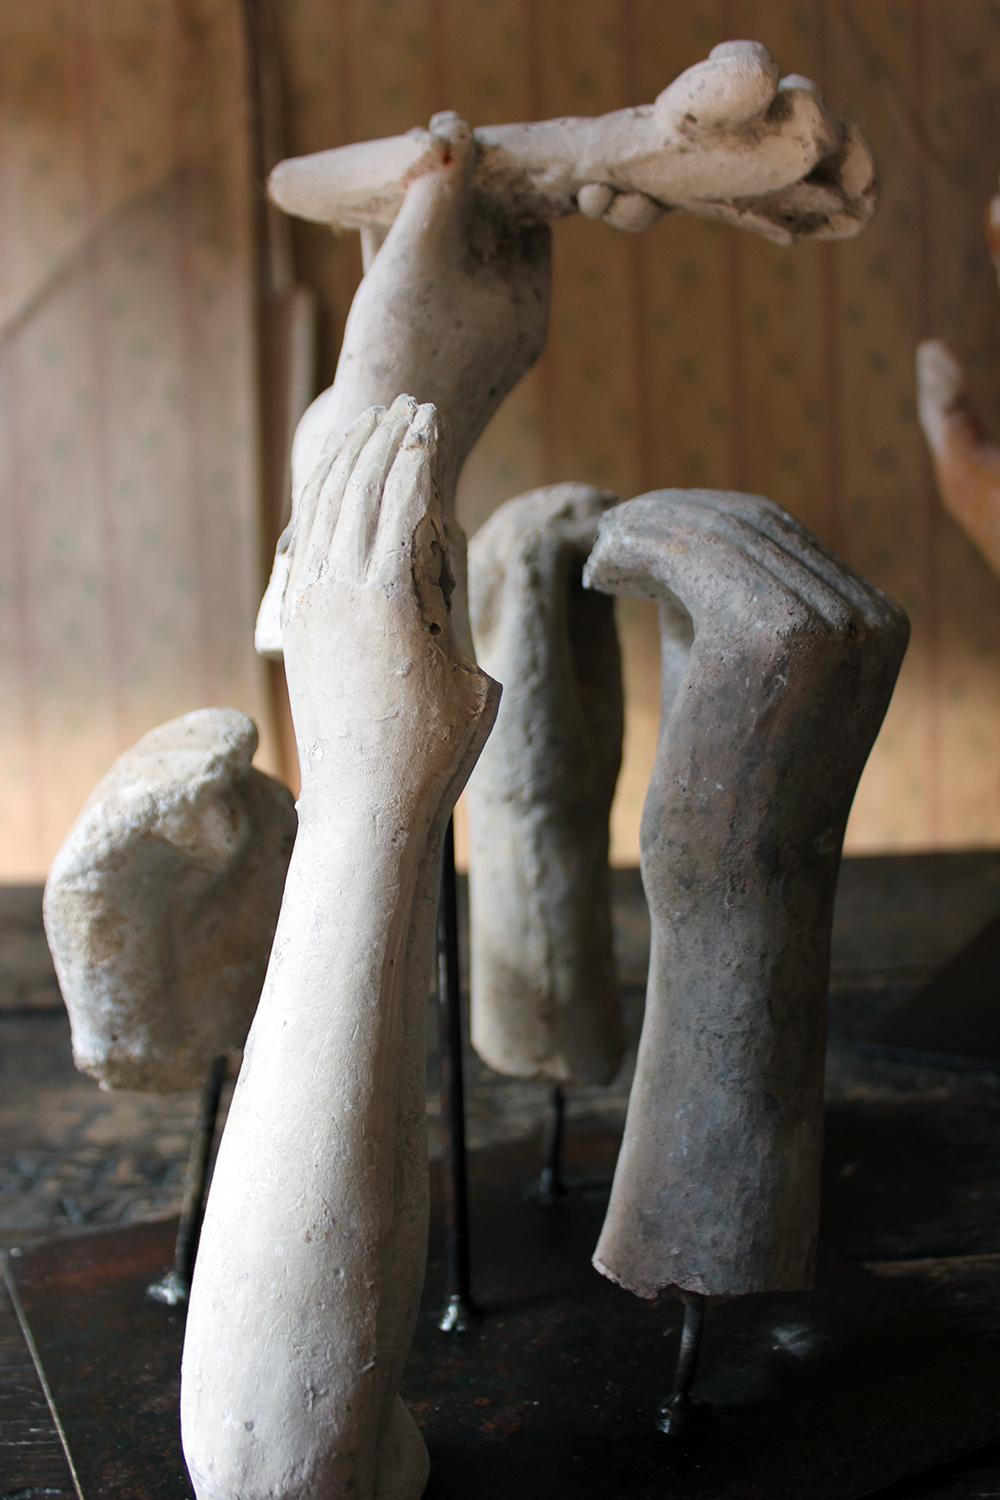 In the Manner of Eduardo Paolozzin Group of 23 Plaster Maquettes 2